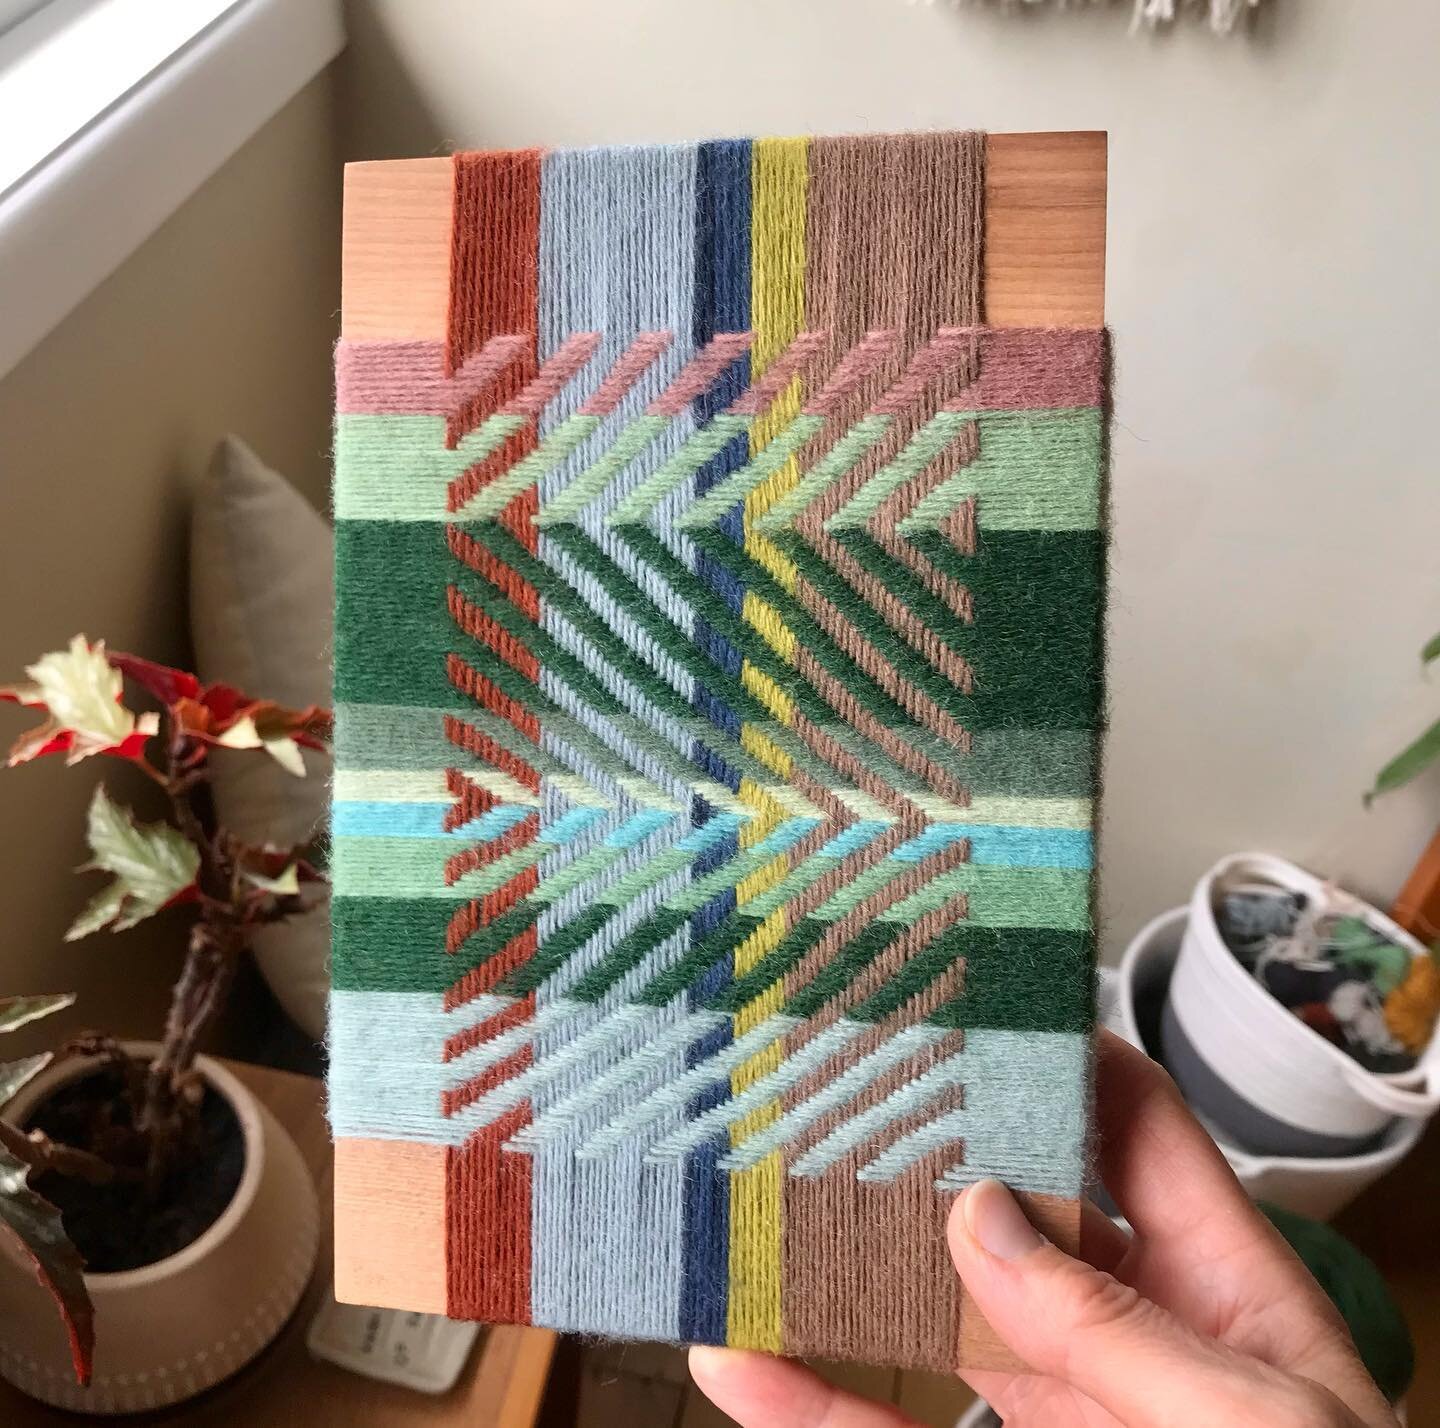 Fin! Swipe to read Rachel O&rsquo;Neill&rsquo;s poem &lsquo;Closer and closer&rsquo; which I kept on coming back to while making this piece. The colours and shape of the weaving are a way to imagine the parachutist swinging back and forward as she fl